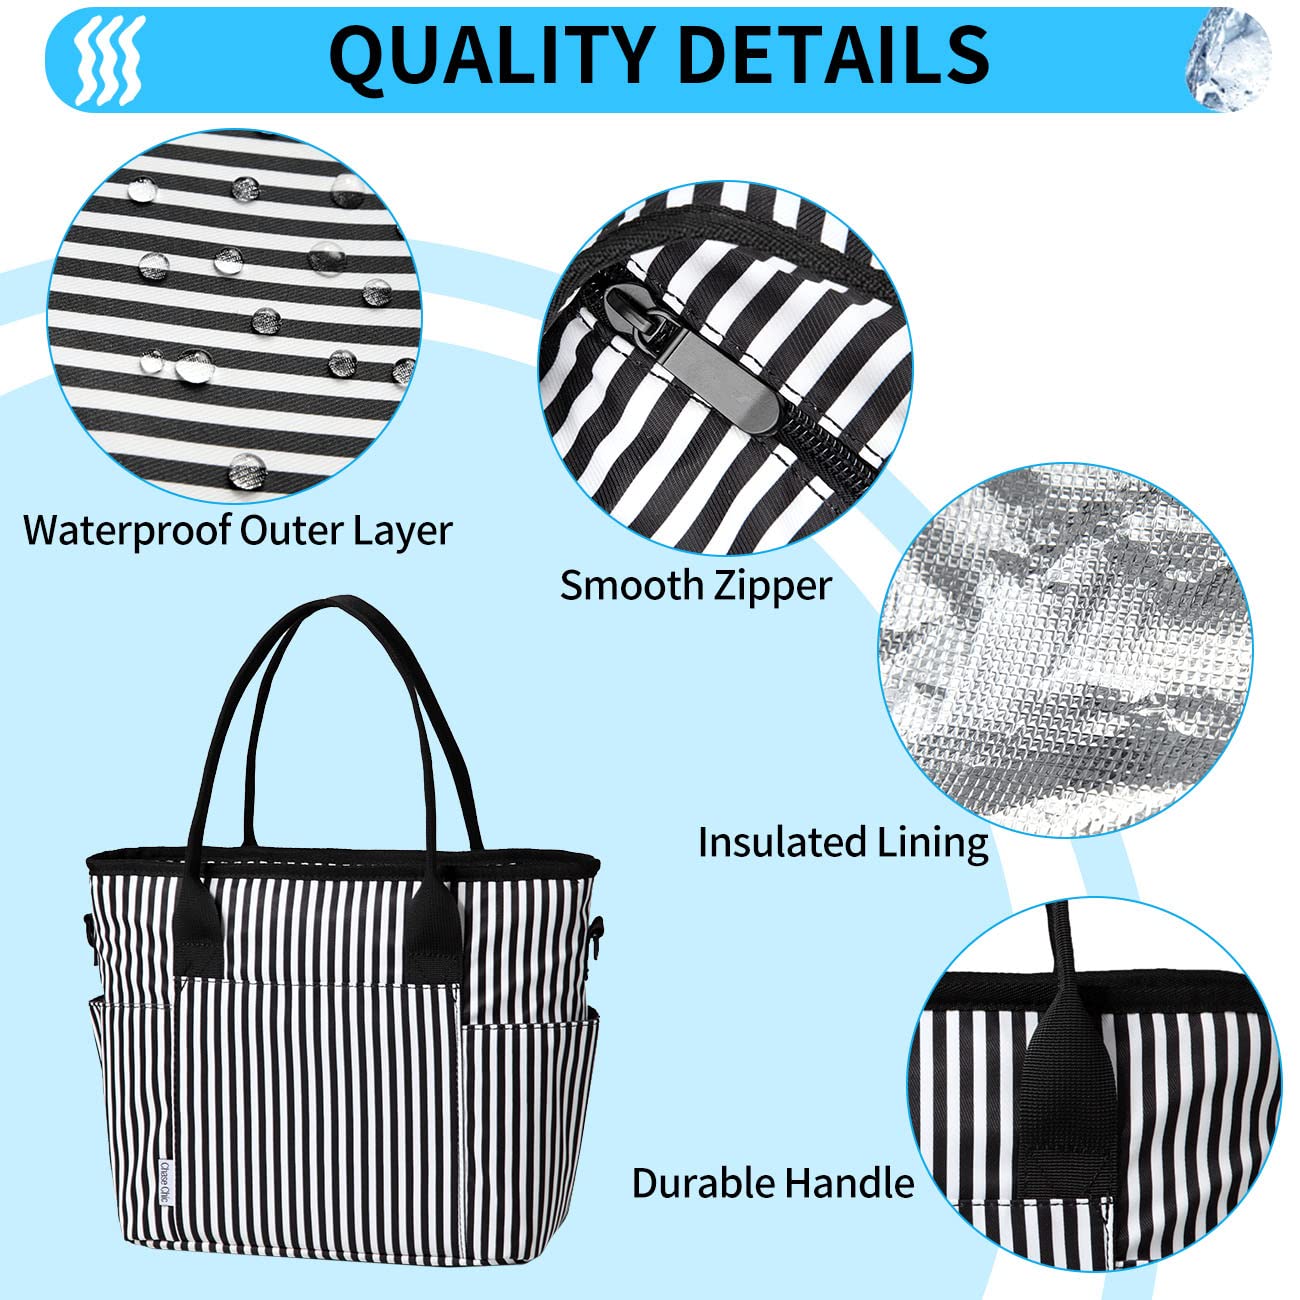 Lunch Bag for Women, ChaseChic Insulated Thermal Lunch Tote Bag Large Lunch Box Container for Adults with Adjustable Shoulder Strap, Reusable Lunch Cooler Bag for Office Work Picnic, Stripe